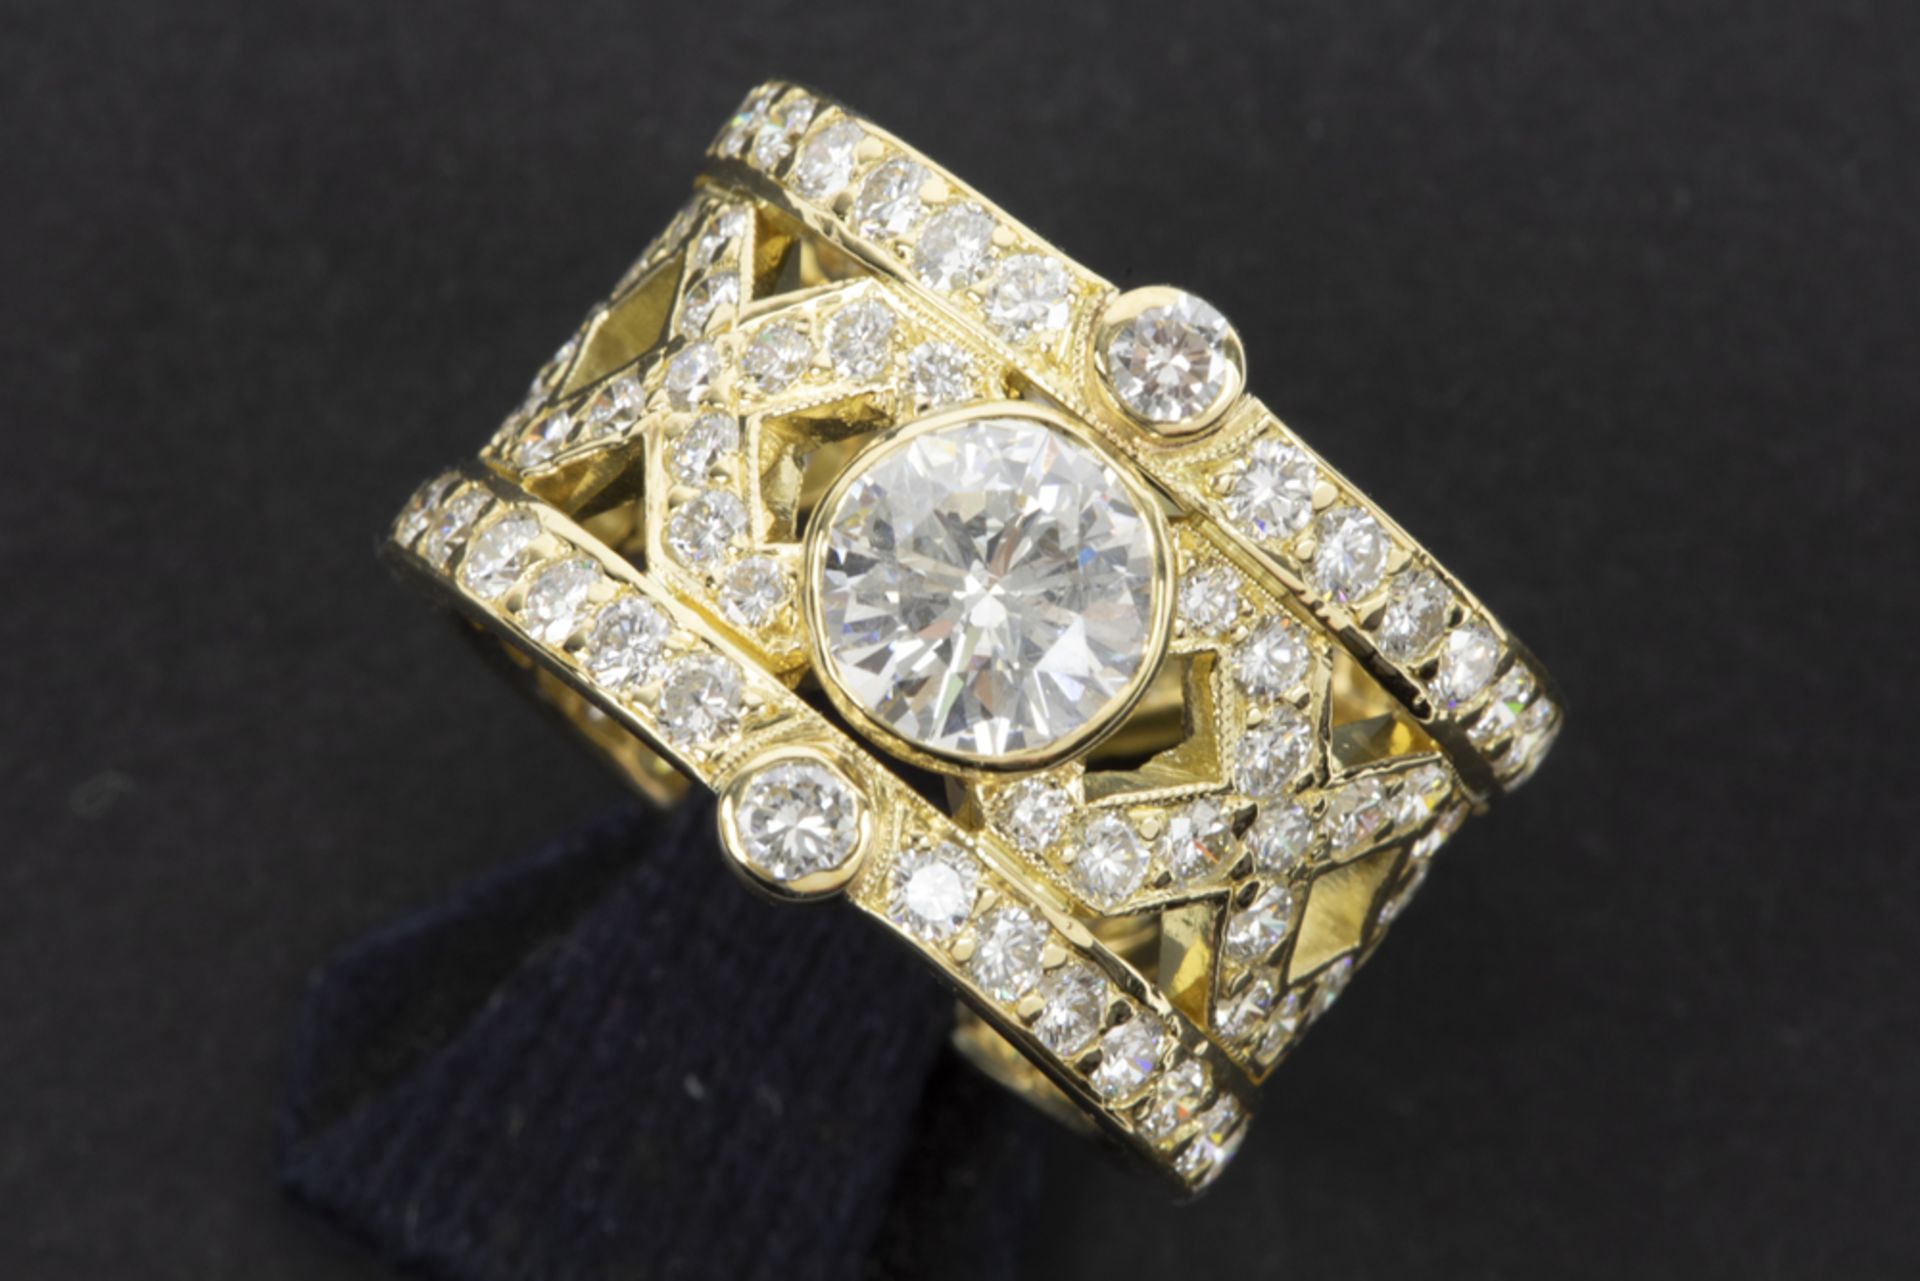 beautiful ring in yellow gold (18 carat) with a 1,05 carat quality brilliant cut diamond and ca 2,80